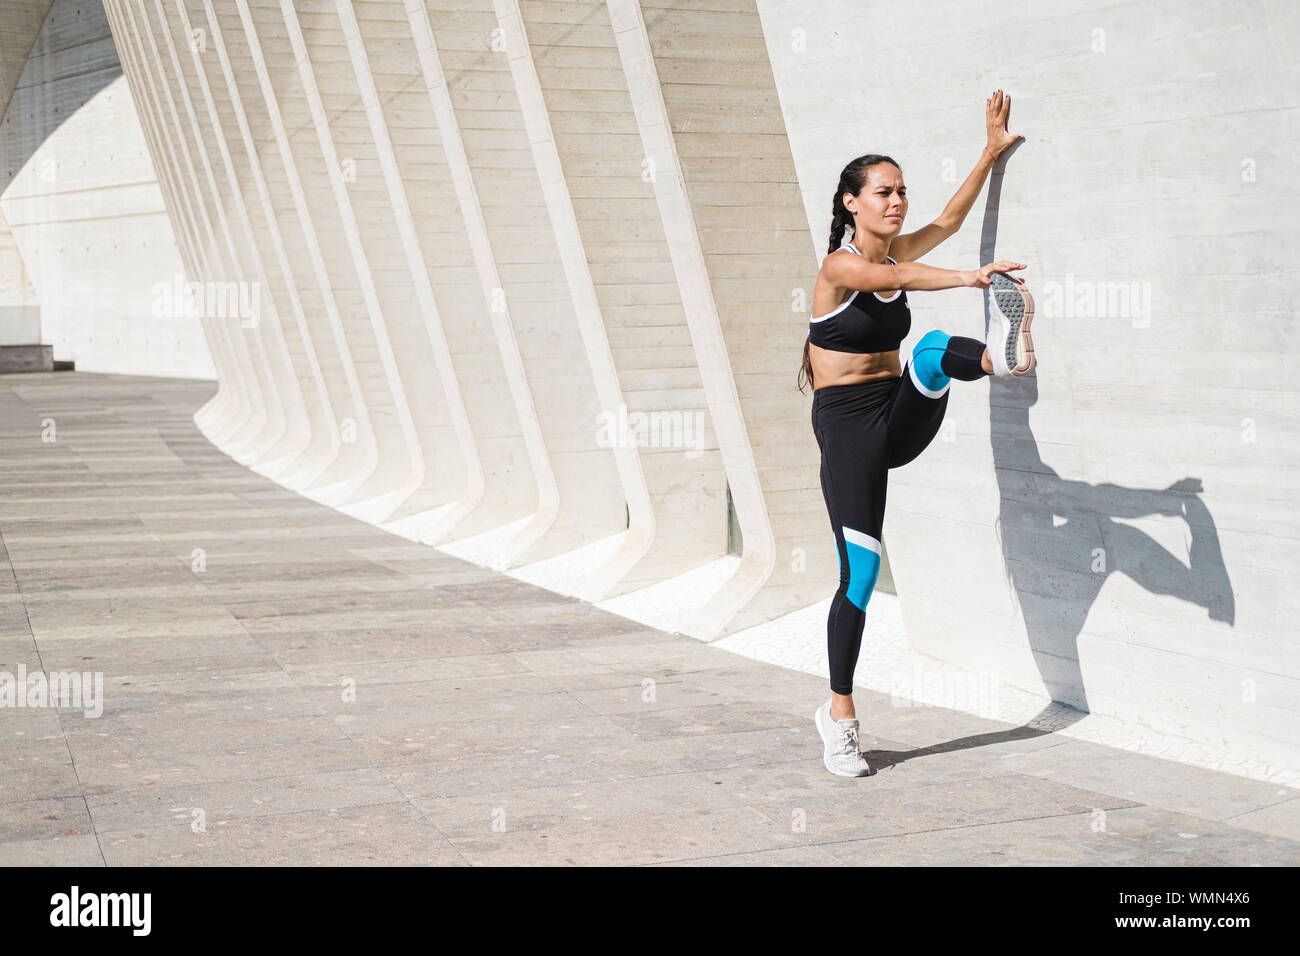 Full body of female athlete stretching legs against concrete wall Stock Photo